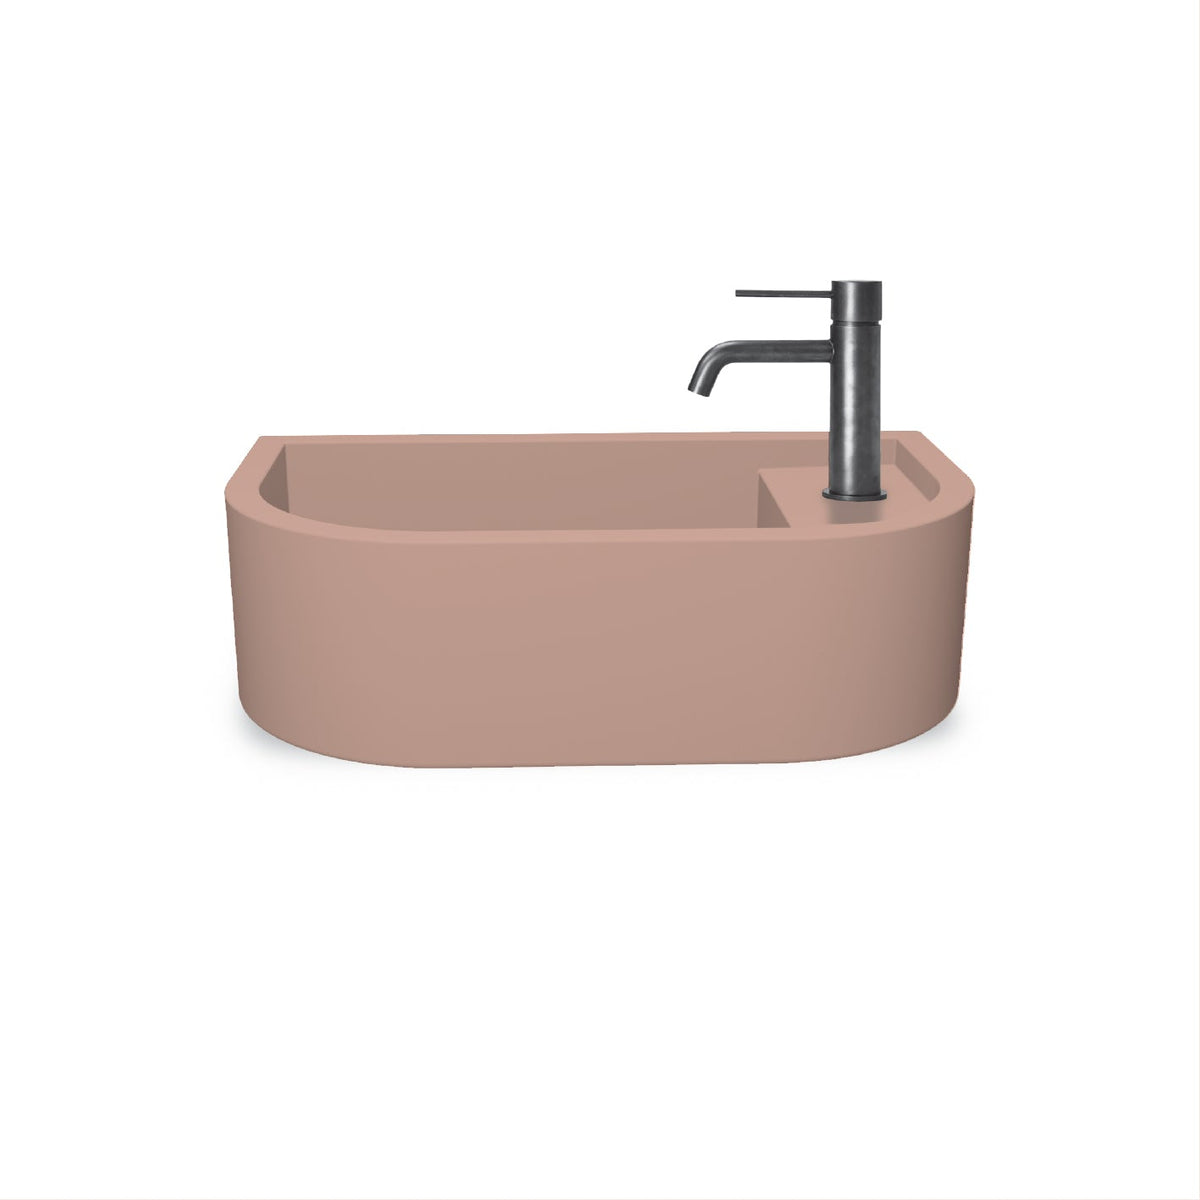 Loop 01 Basin - Overflow - Wall Hung (Blush Pink,Tap Hole,Brass)